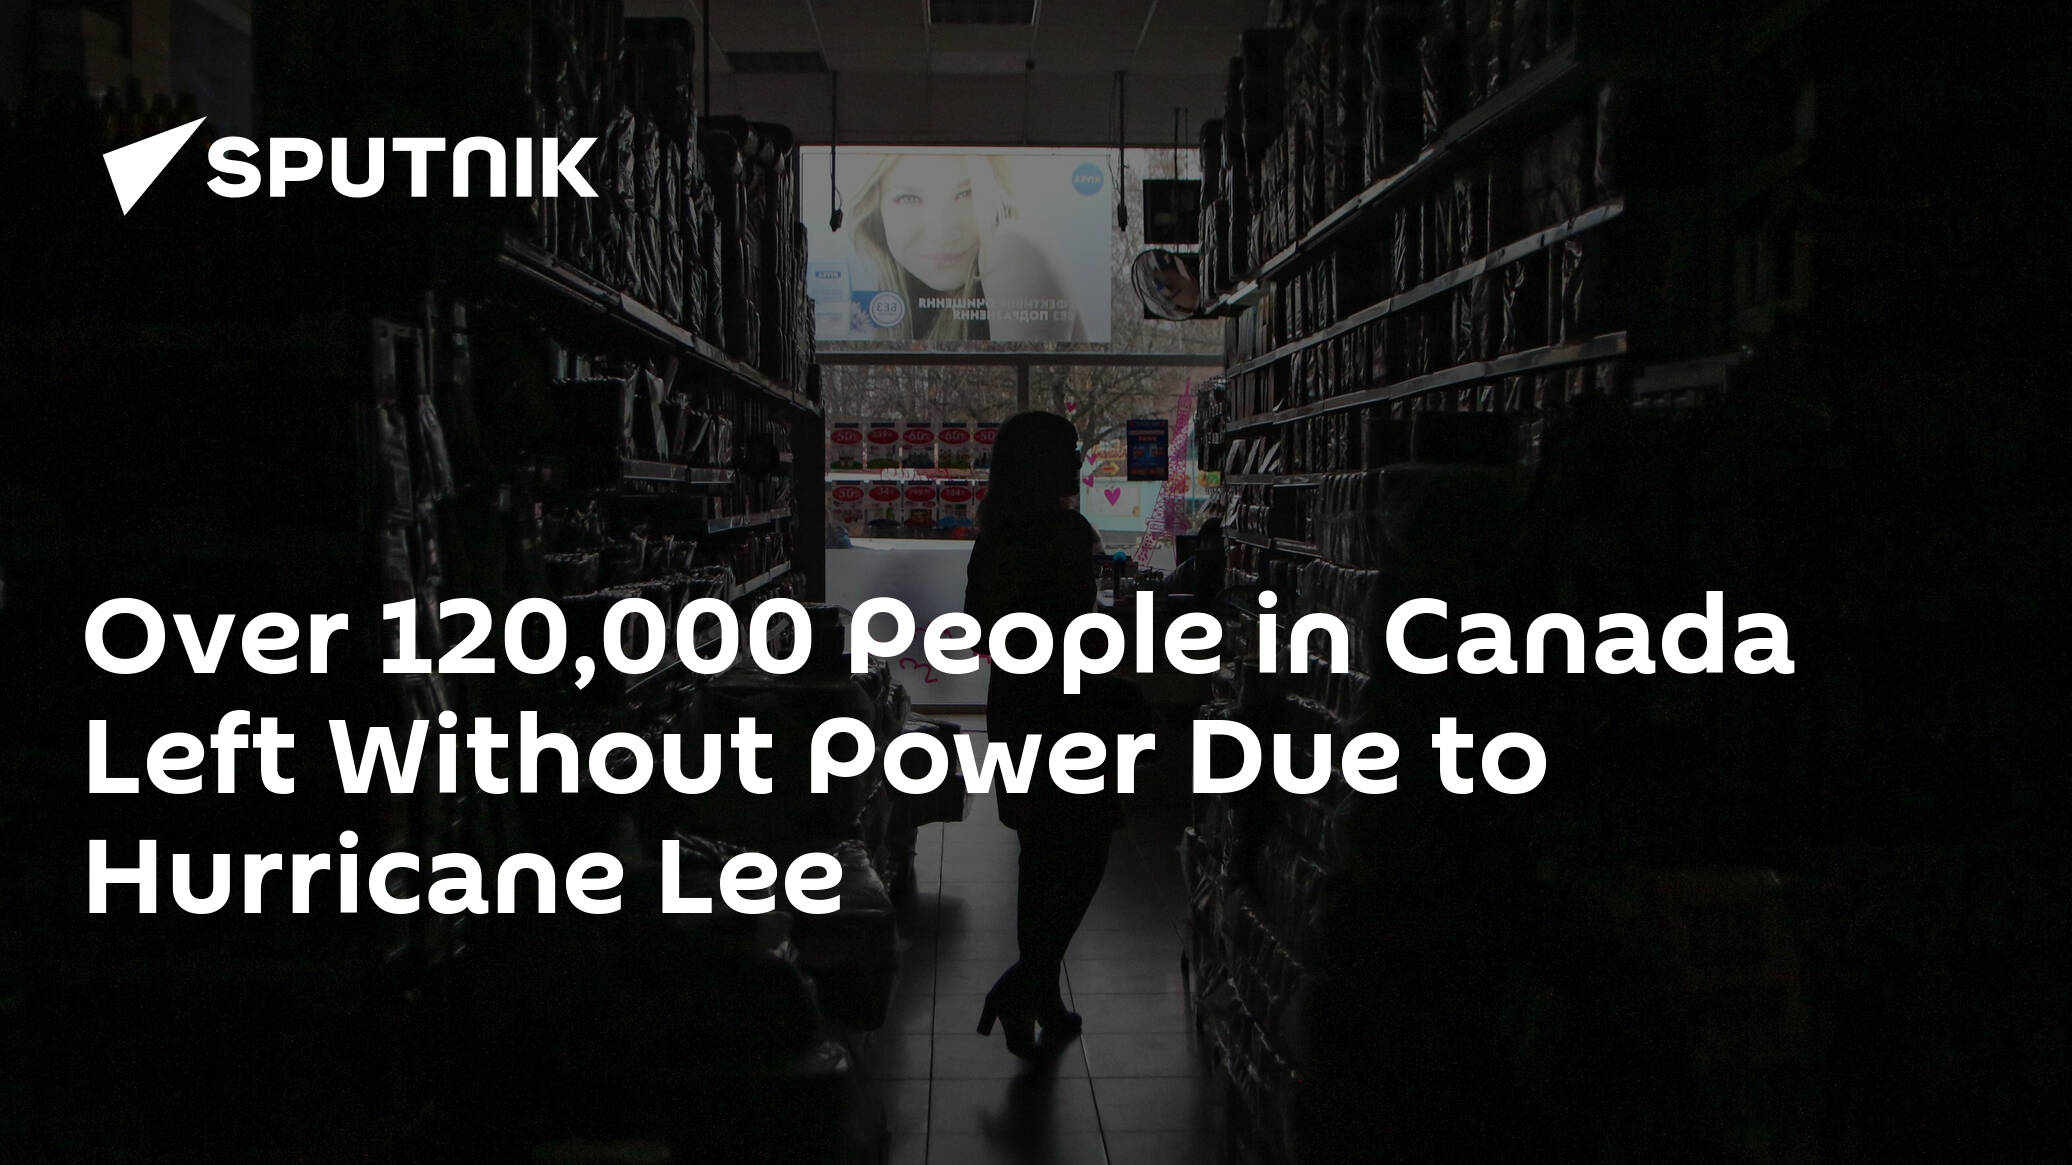 Over 120,000 People in Canada Left Without Power Due to Hurricane Lee